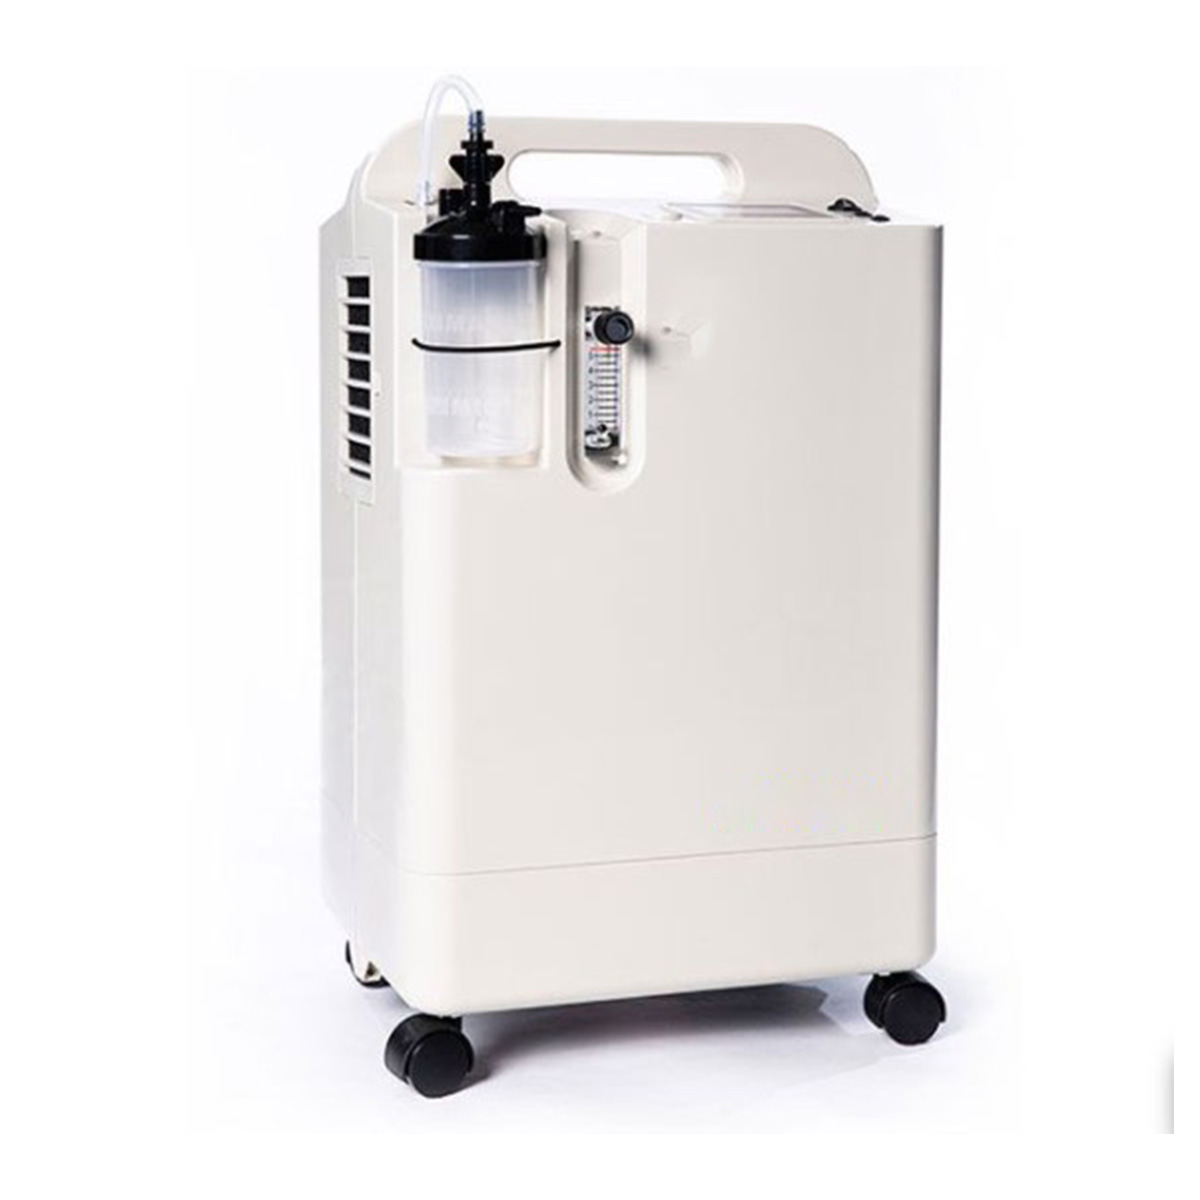 5 Longfian Oxygen Concentrator On Sale Suppliers, Service Provider in Dilshad garden